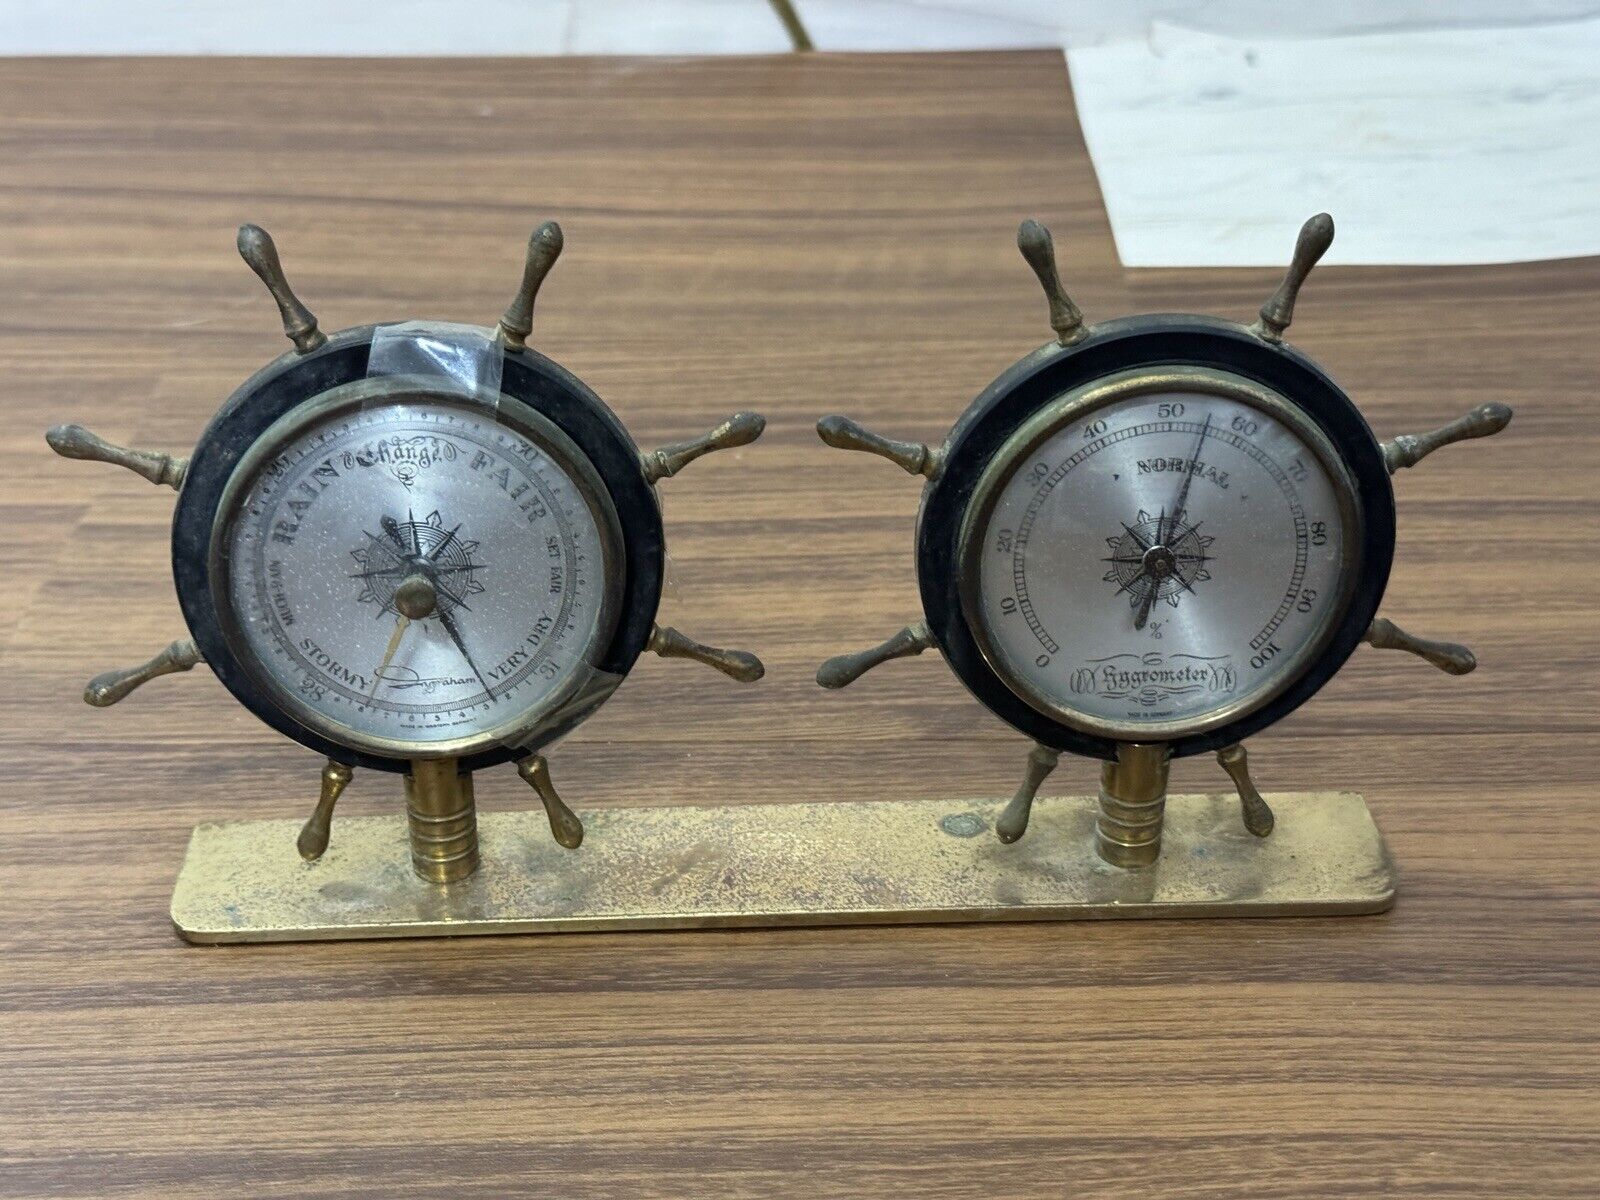 Vintage Airguide Barometer Ship's Wheel Nautical Weather Station Thermometer